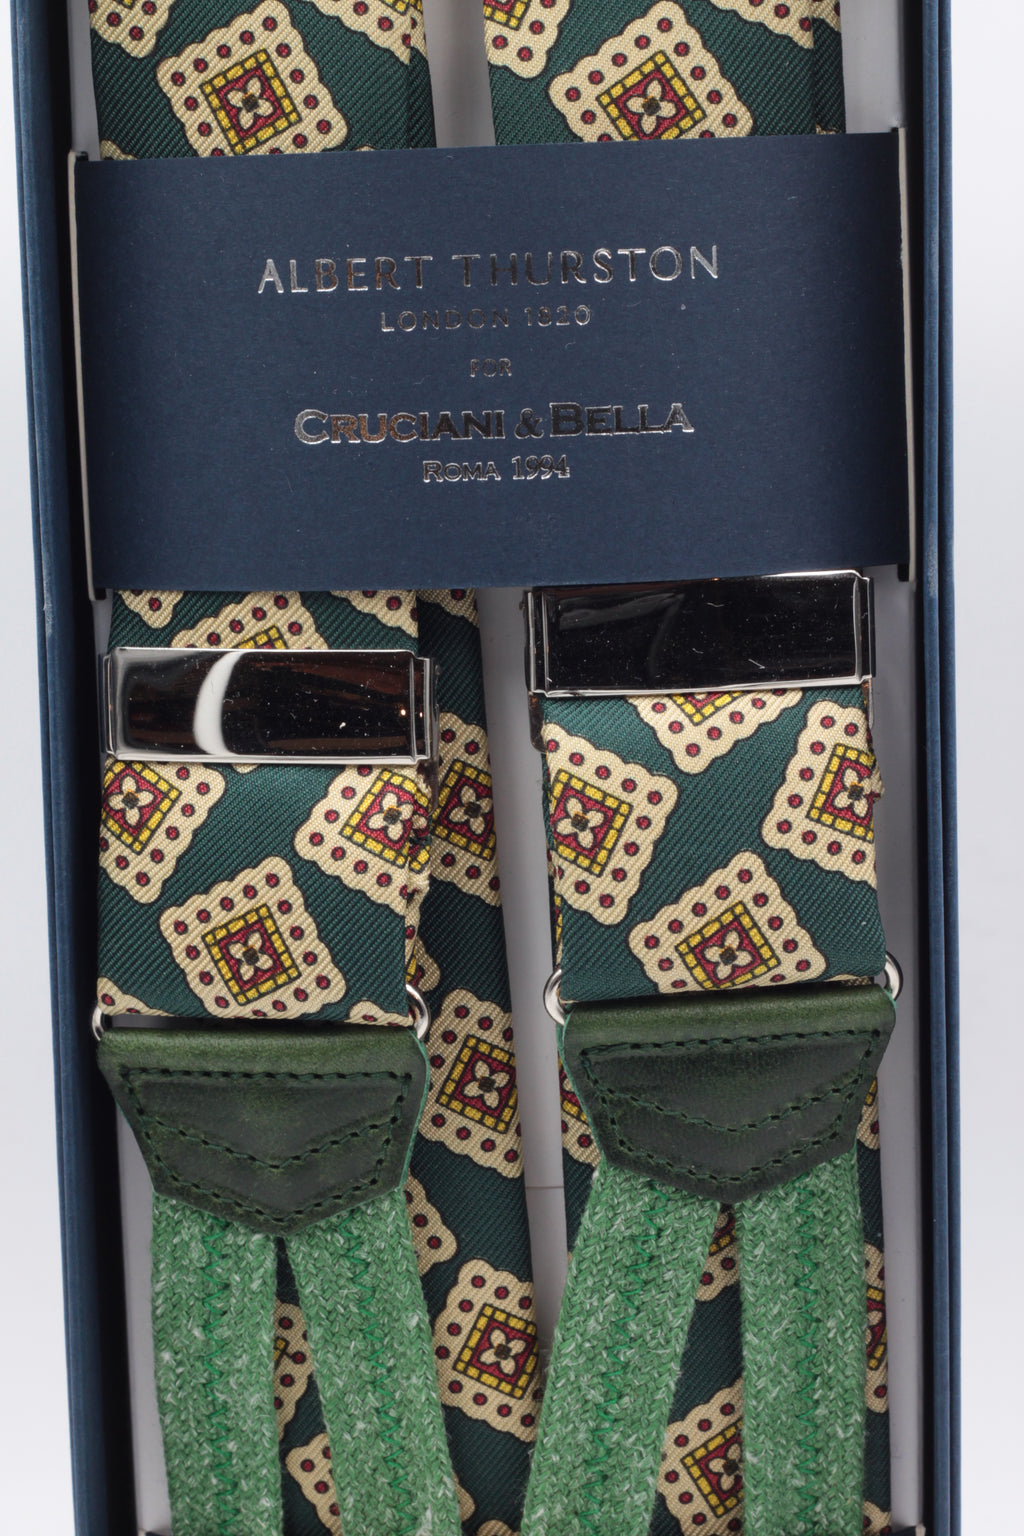 Albert Thurston for Cruciani & Bella Made in England Adjustable Sizing 40 mm Green, beige motif braces Braid ends Y-Shaped Nickel Fittings